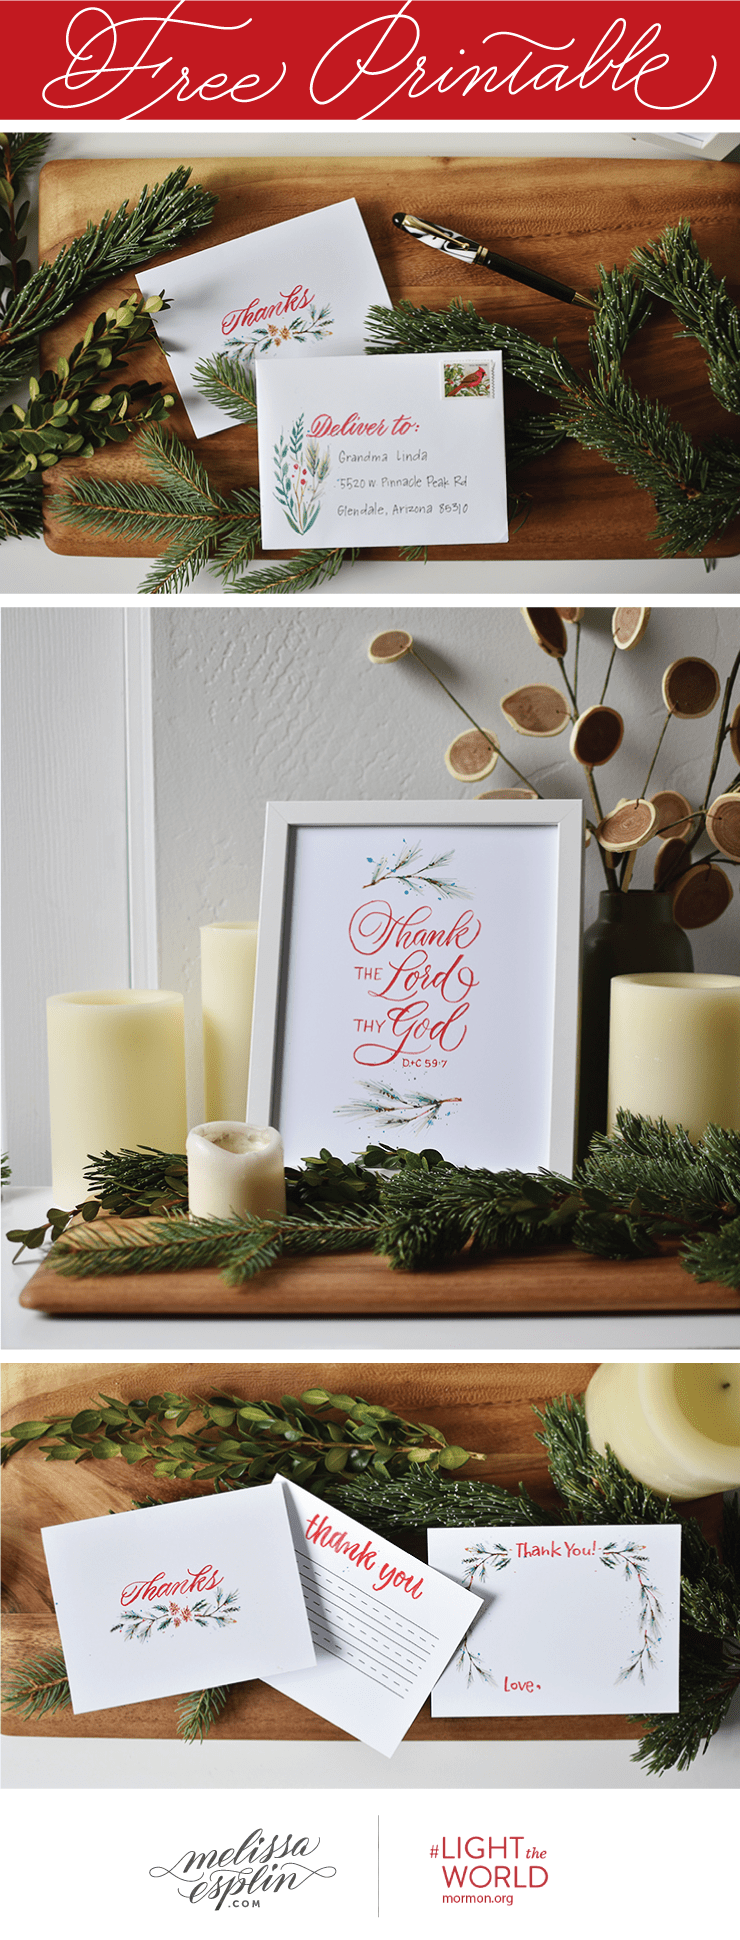 Free thank you cards, envelope, and Thank the Lord print from Melissa Esplin. #LIGHTtheWORLD